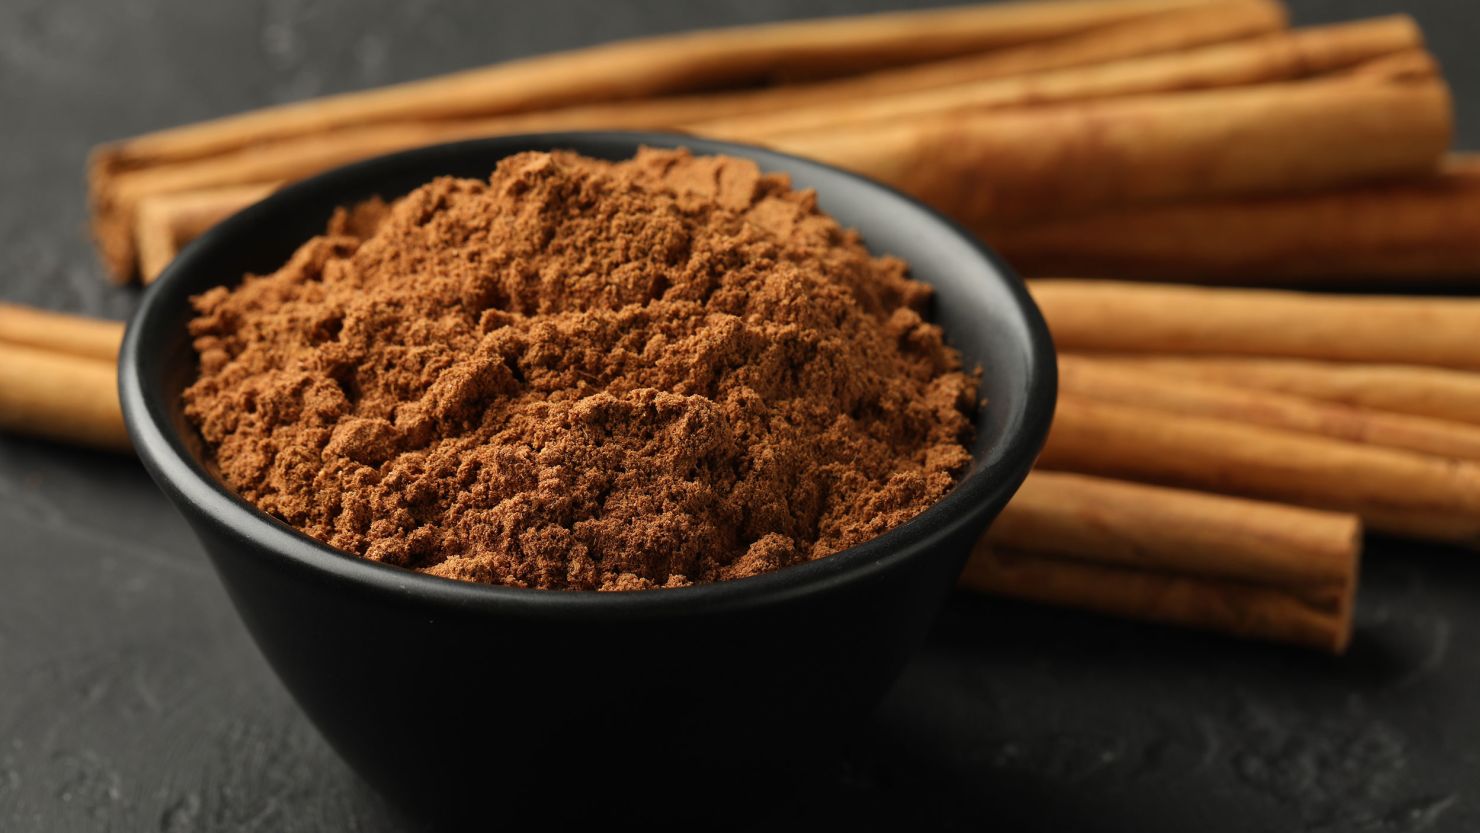 The agency said expanded testing has identified several brands of ground cinnamon with elevated levels of lead.